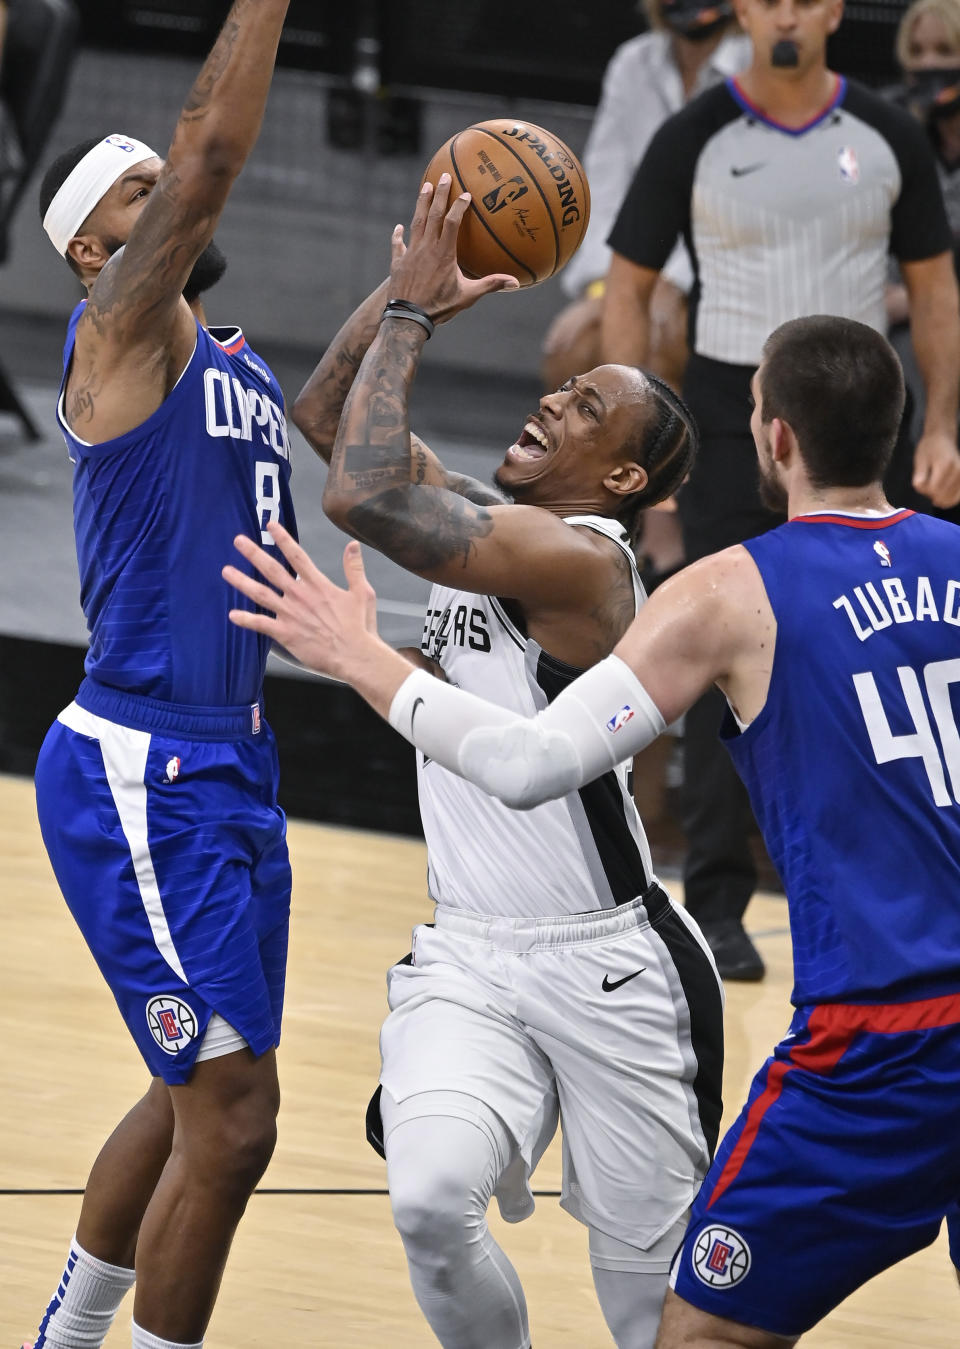 San Antonio Spurs' DeMar DeRozan, center, drives against Los Angeles Clippers' Marcus Morris, Sr. (8) and Ivica Zubac during the first half of an NBA basketball game on Wednesday, March 24, 2021, in San Antonio. (AP Photo/Darren Abate)